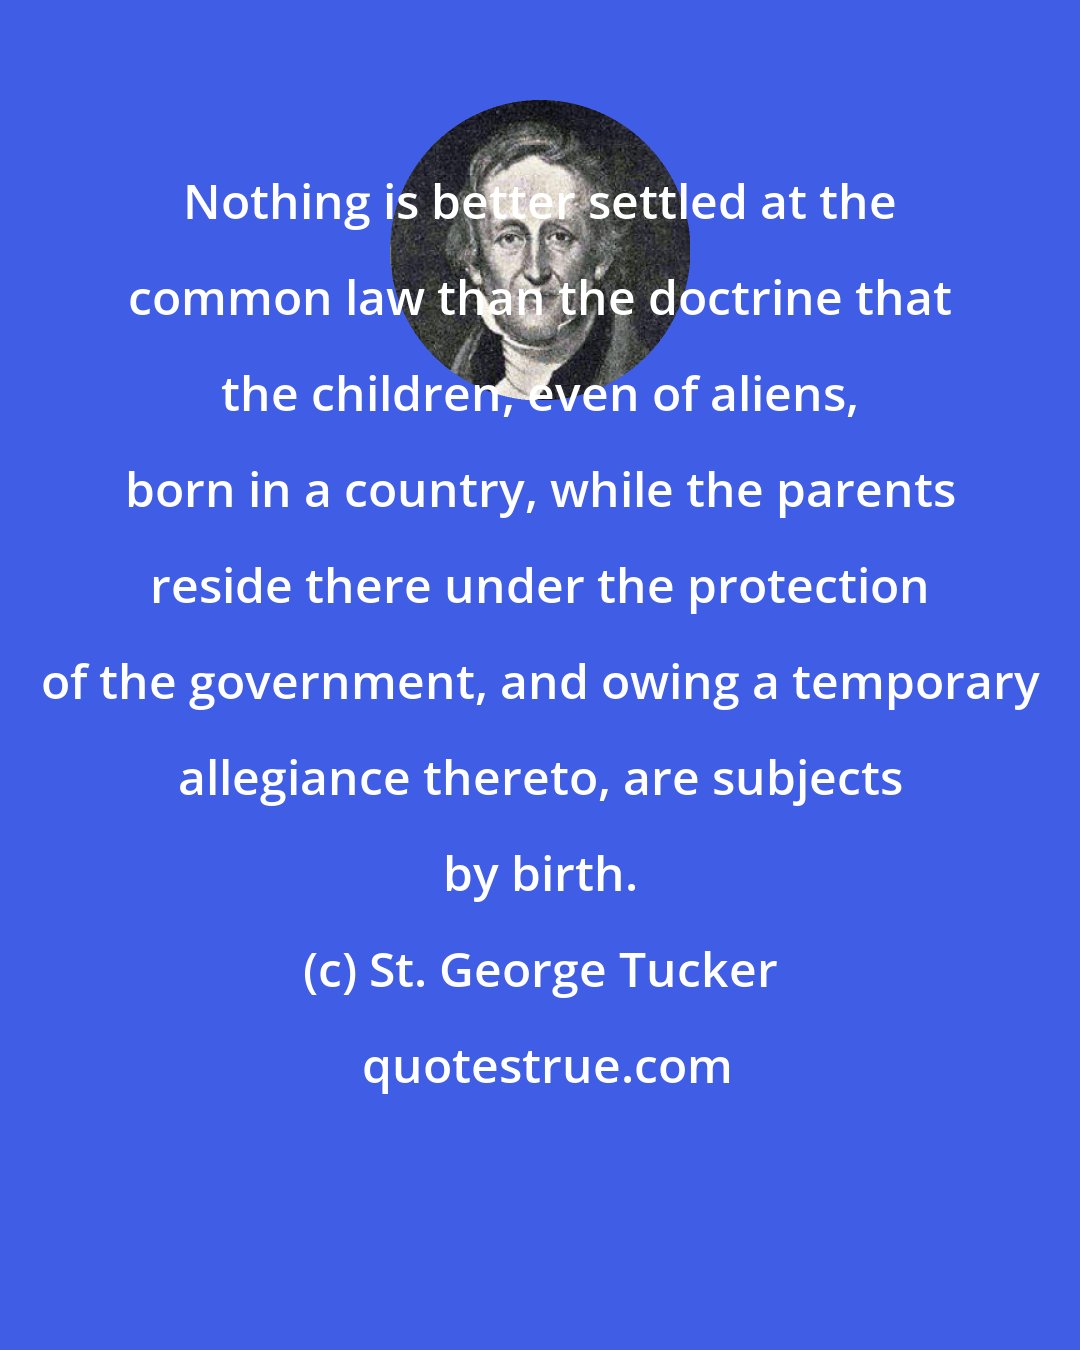 St. George Tucker: Nothing is better settled at the common law than the doctrine that the children, even of aliens, born in a country, while the parents reside there under the protection of the government, and owing a temporary allegiance thereto, are subjects by birth.